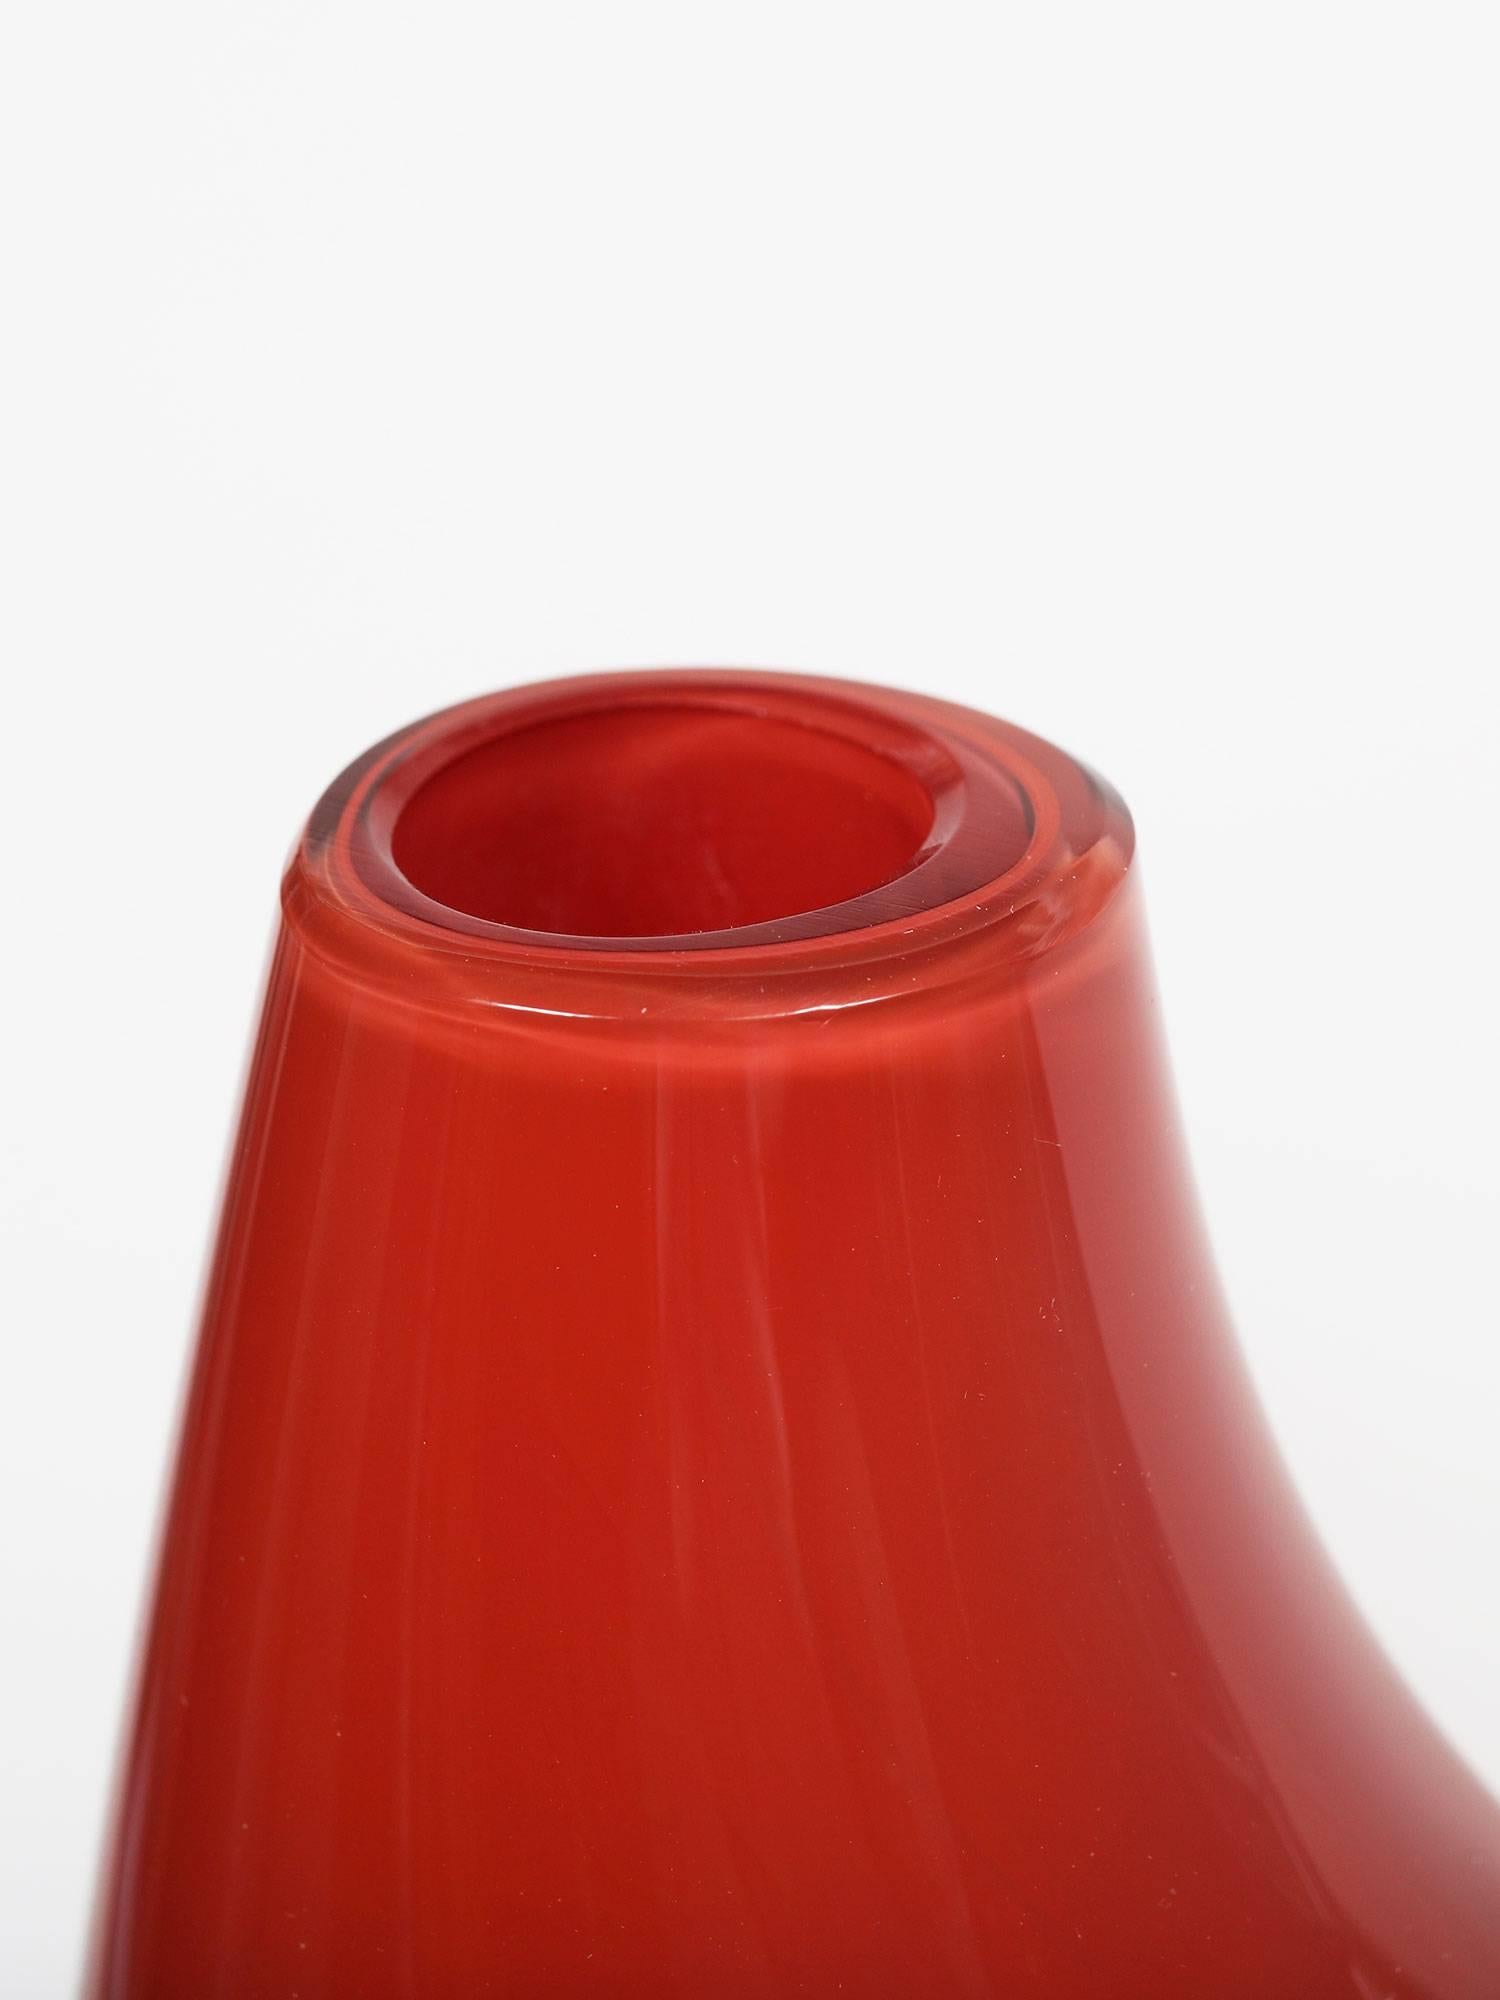 A beautiful incalmo technique red and clear glass vase designed by Sergio Asti for the Salviati Company of Murano, Italy. Signed with an etched signature 